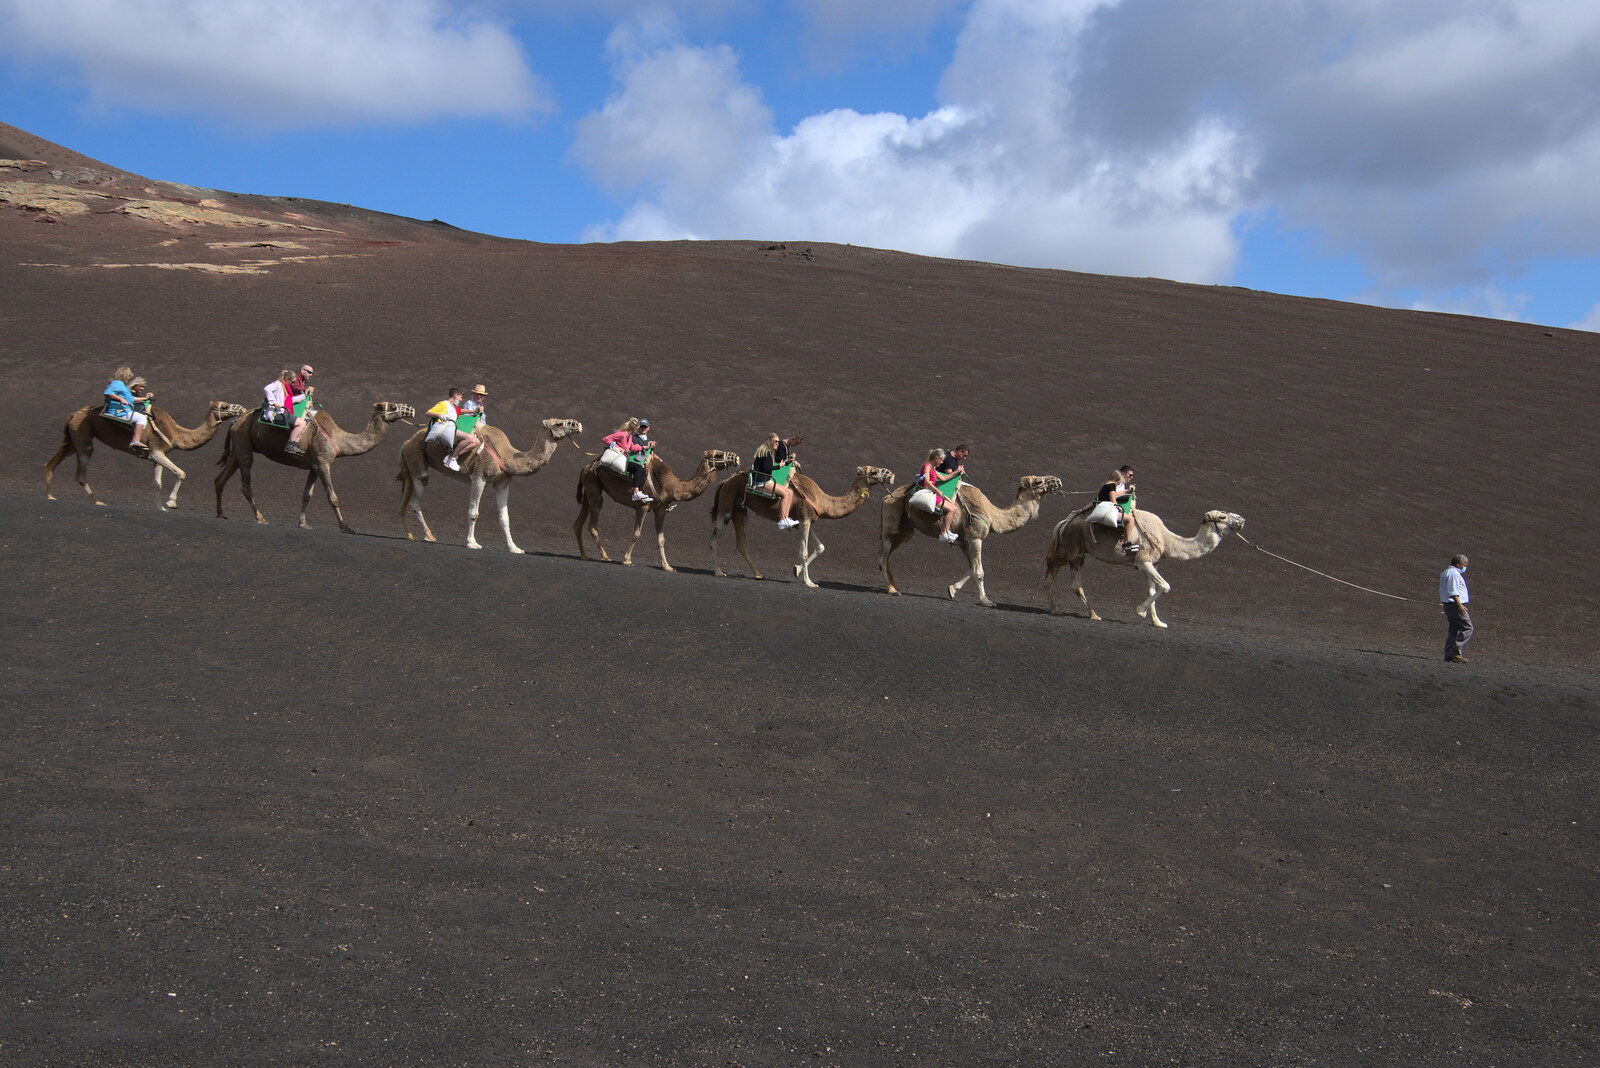 Another camel train heads down the volcano from The Volcanoes of Lanzarote, Canary Islands, Spain - 27th October 2021